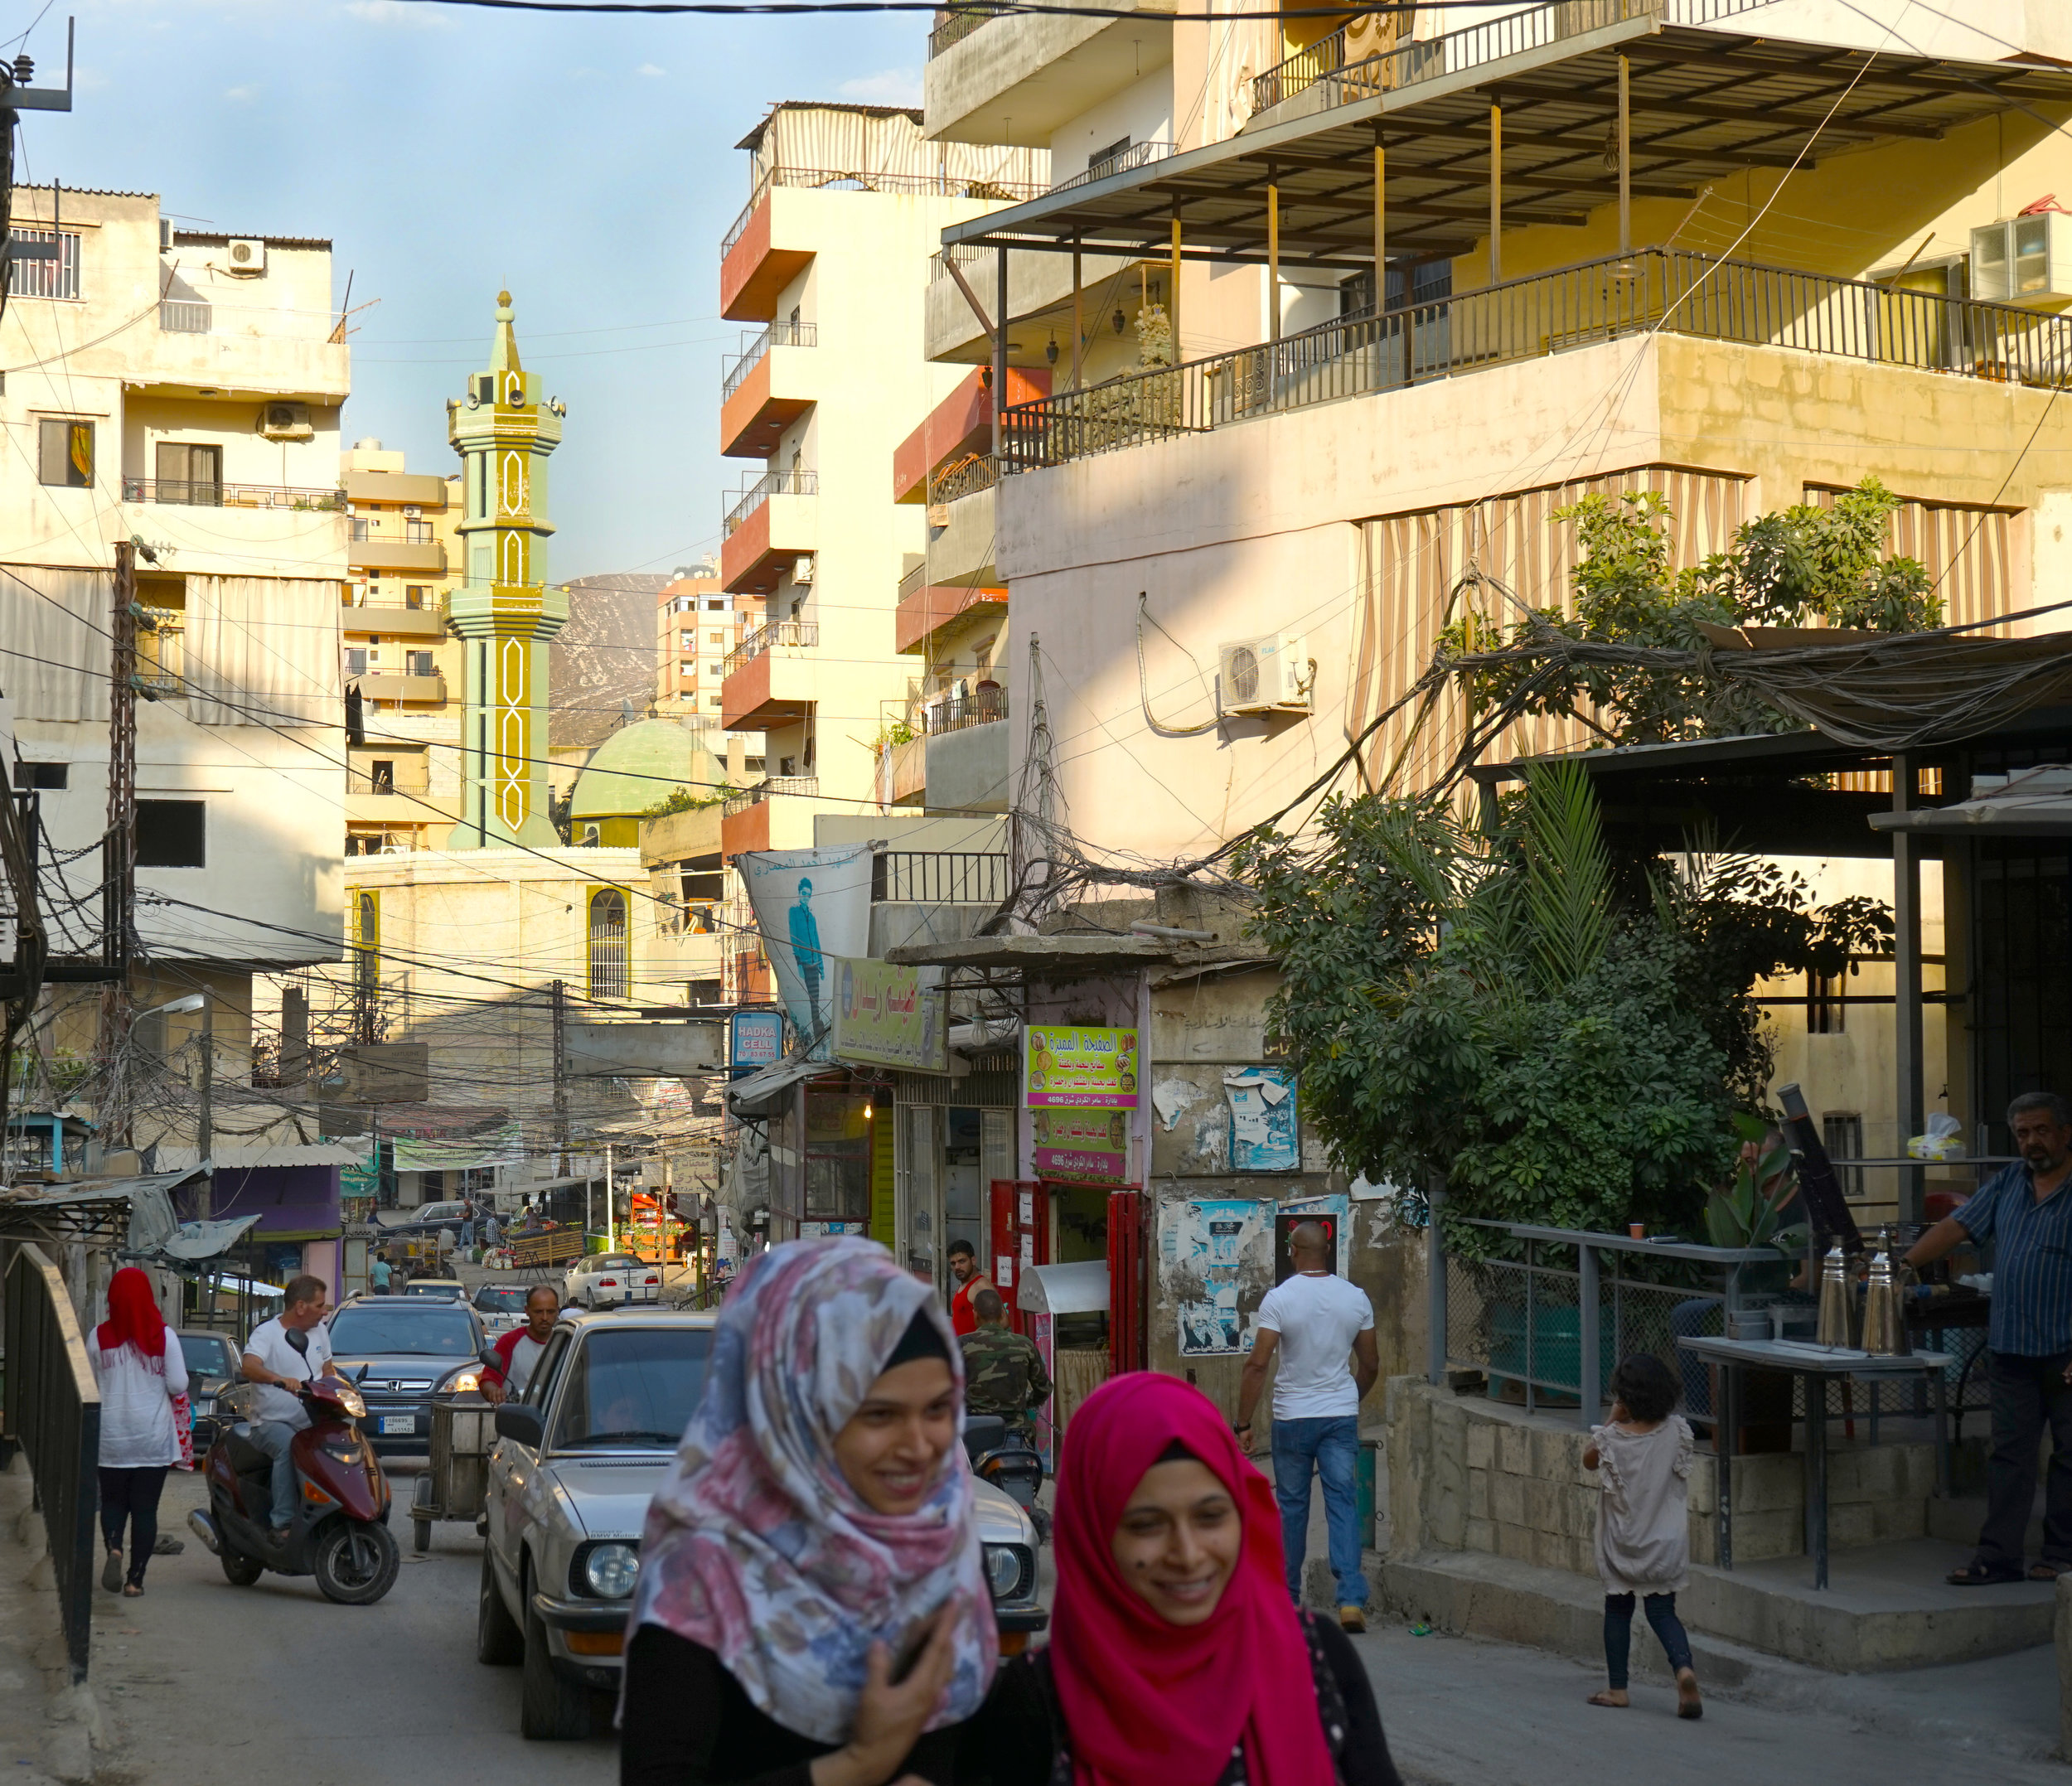  Two girls walk down the street of Camp Beddawi on August 20, 2016, with the Camp's mosque looming in the background. 